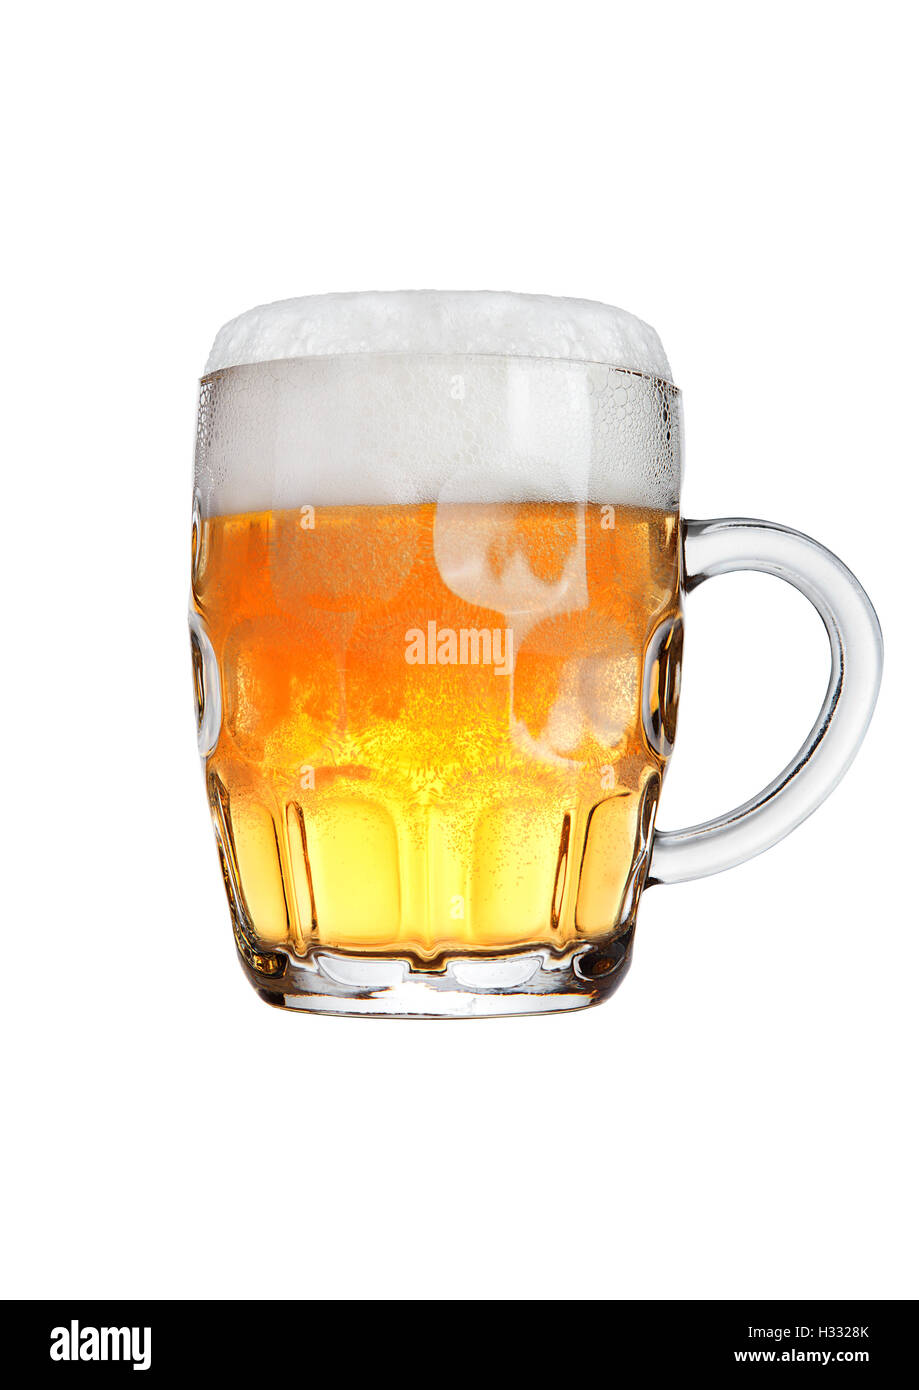 Retro glass of beer with foam isolated on white background Stock Photo